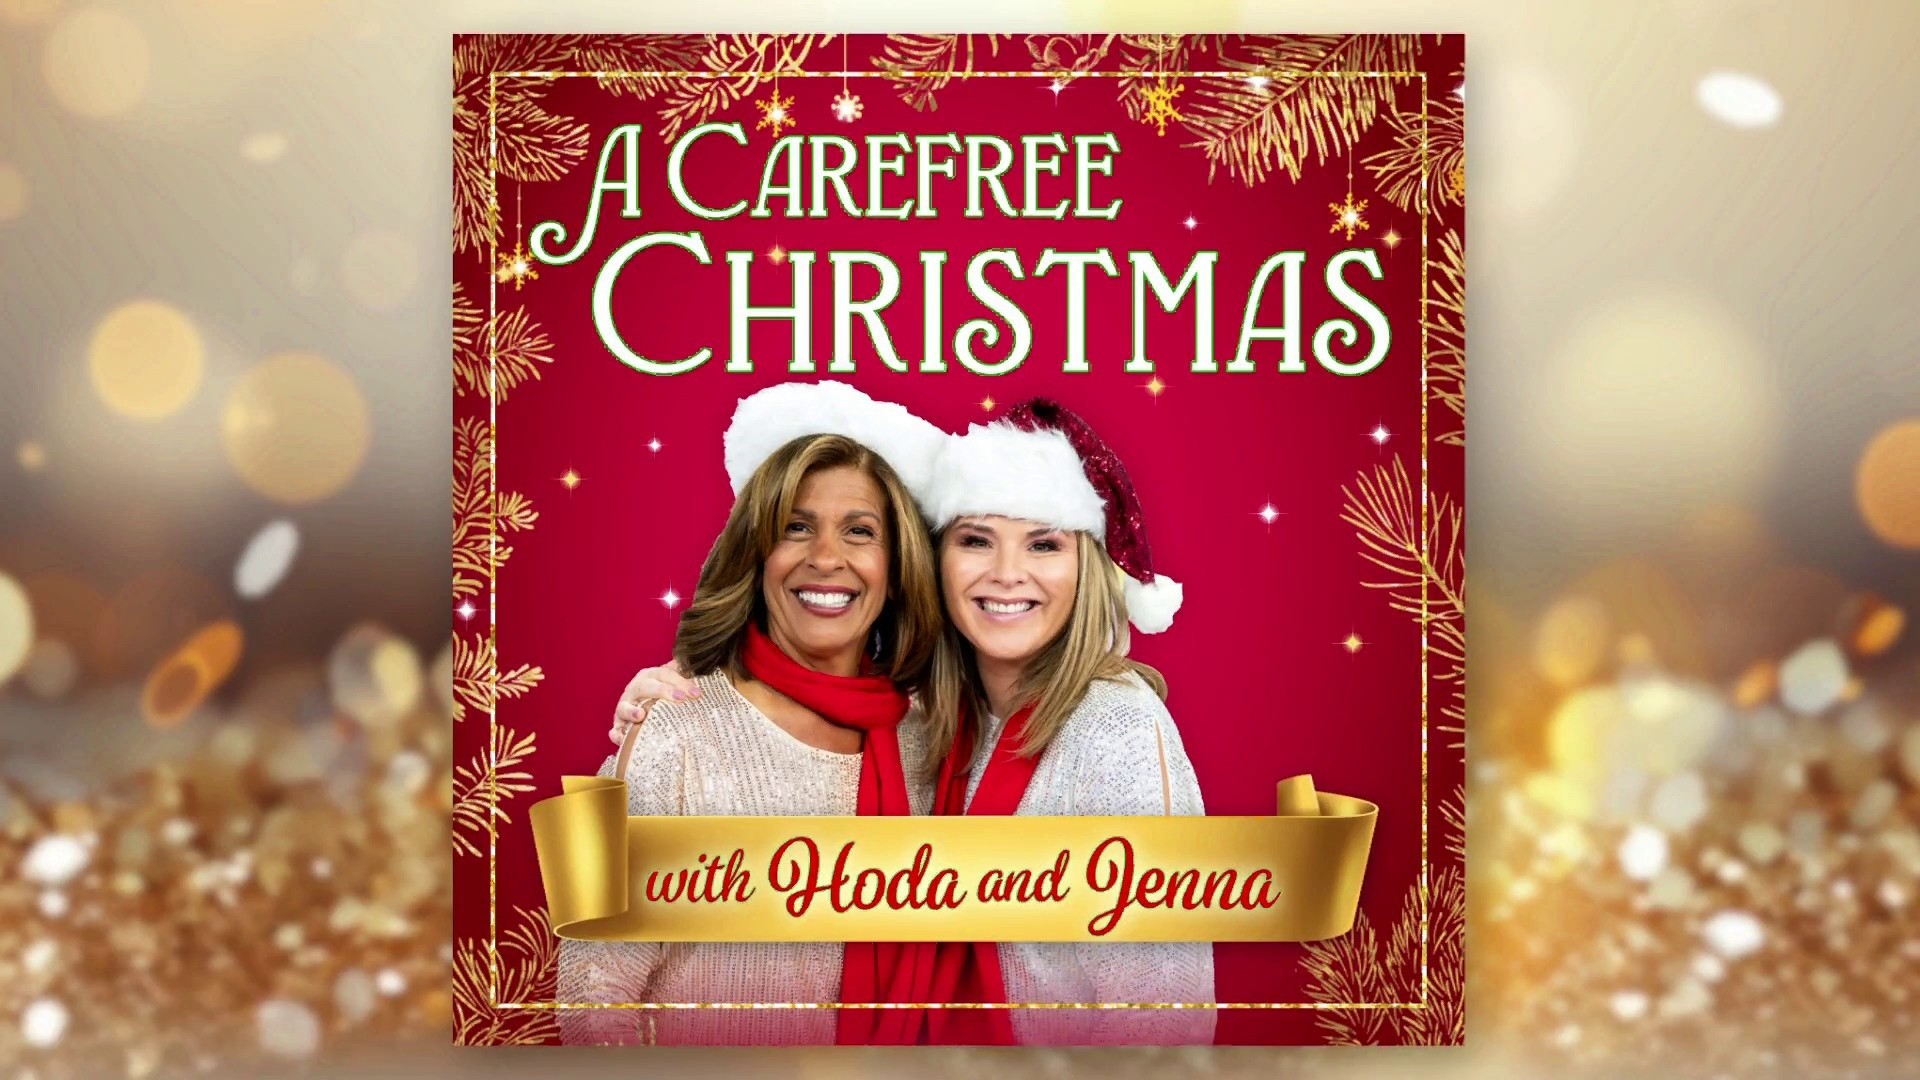 Get a first look at Hoda & Jenna's holiday album cover art!